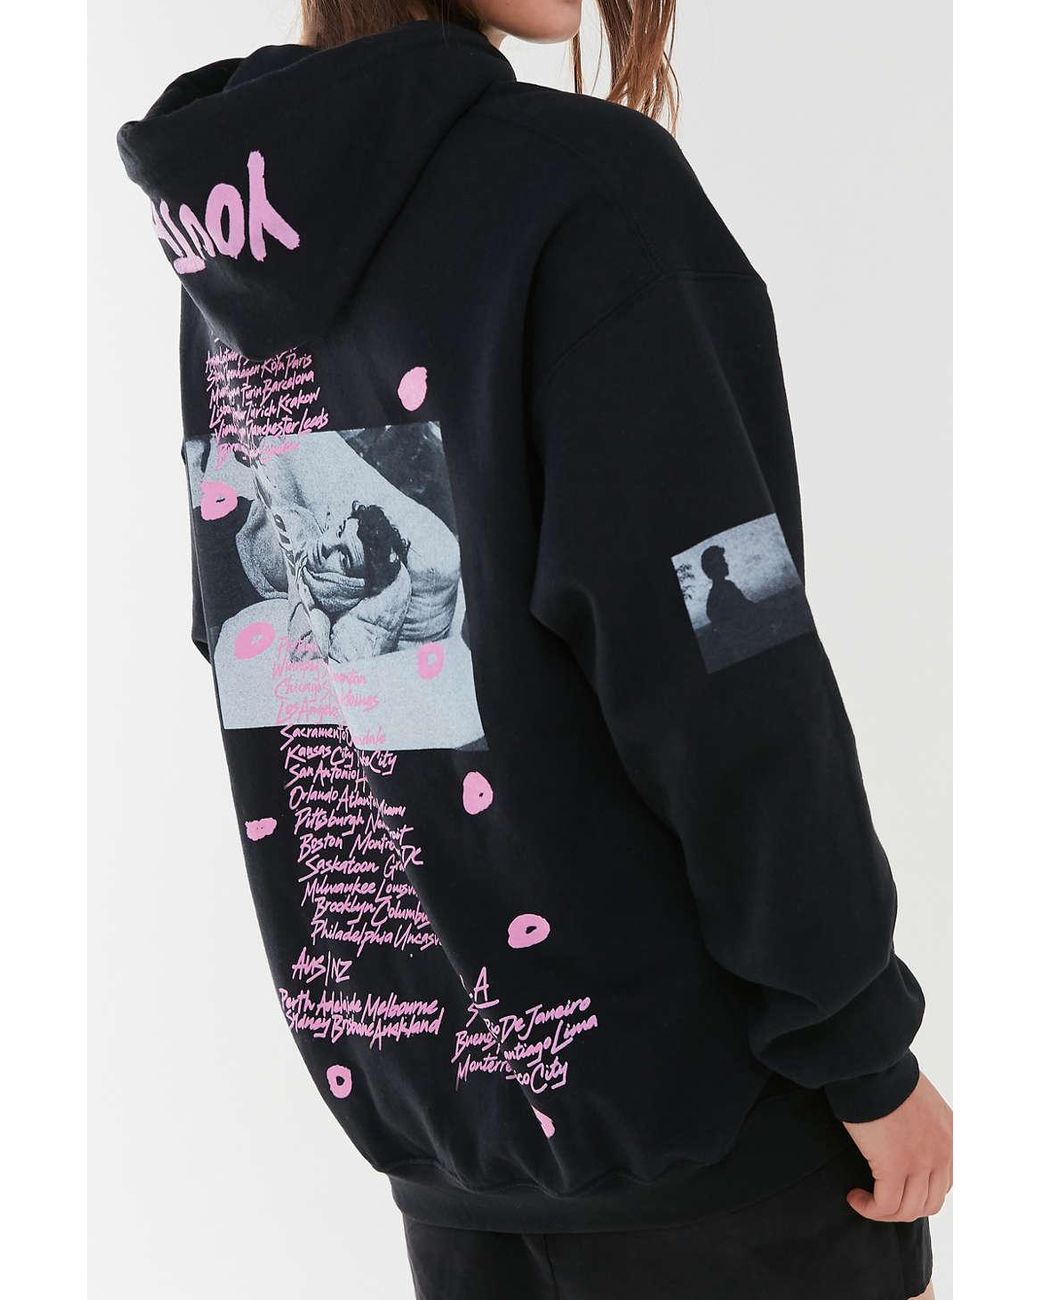 Urban Outfitters Shawn Mendes: The Tour Hoodie Sweatshirt in Black | Lyst